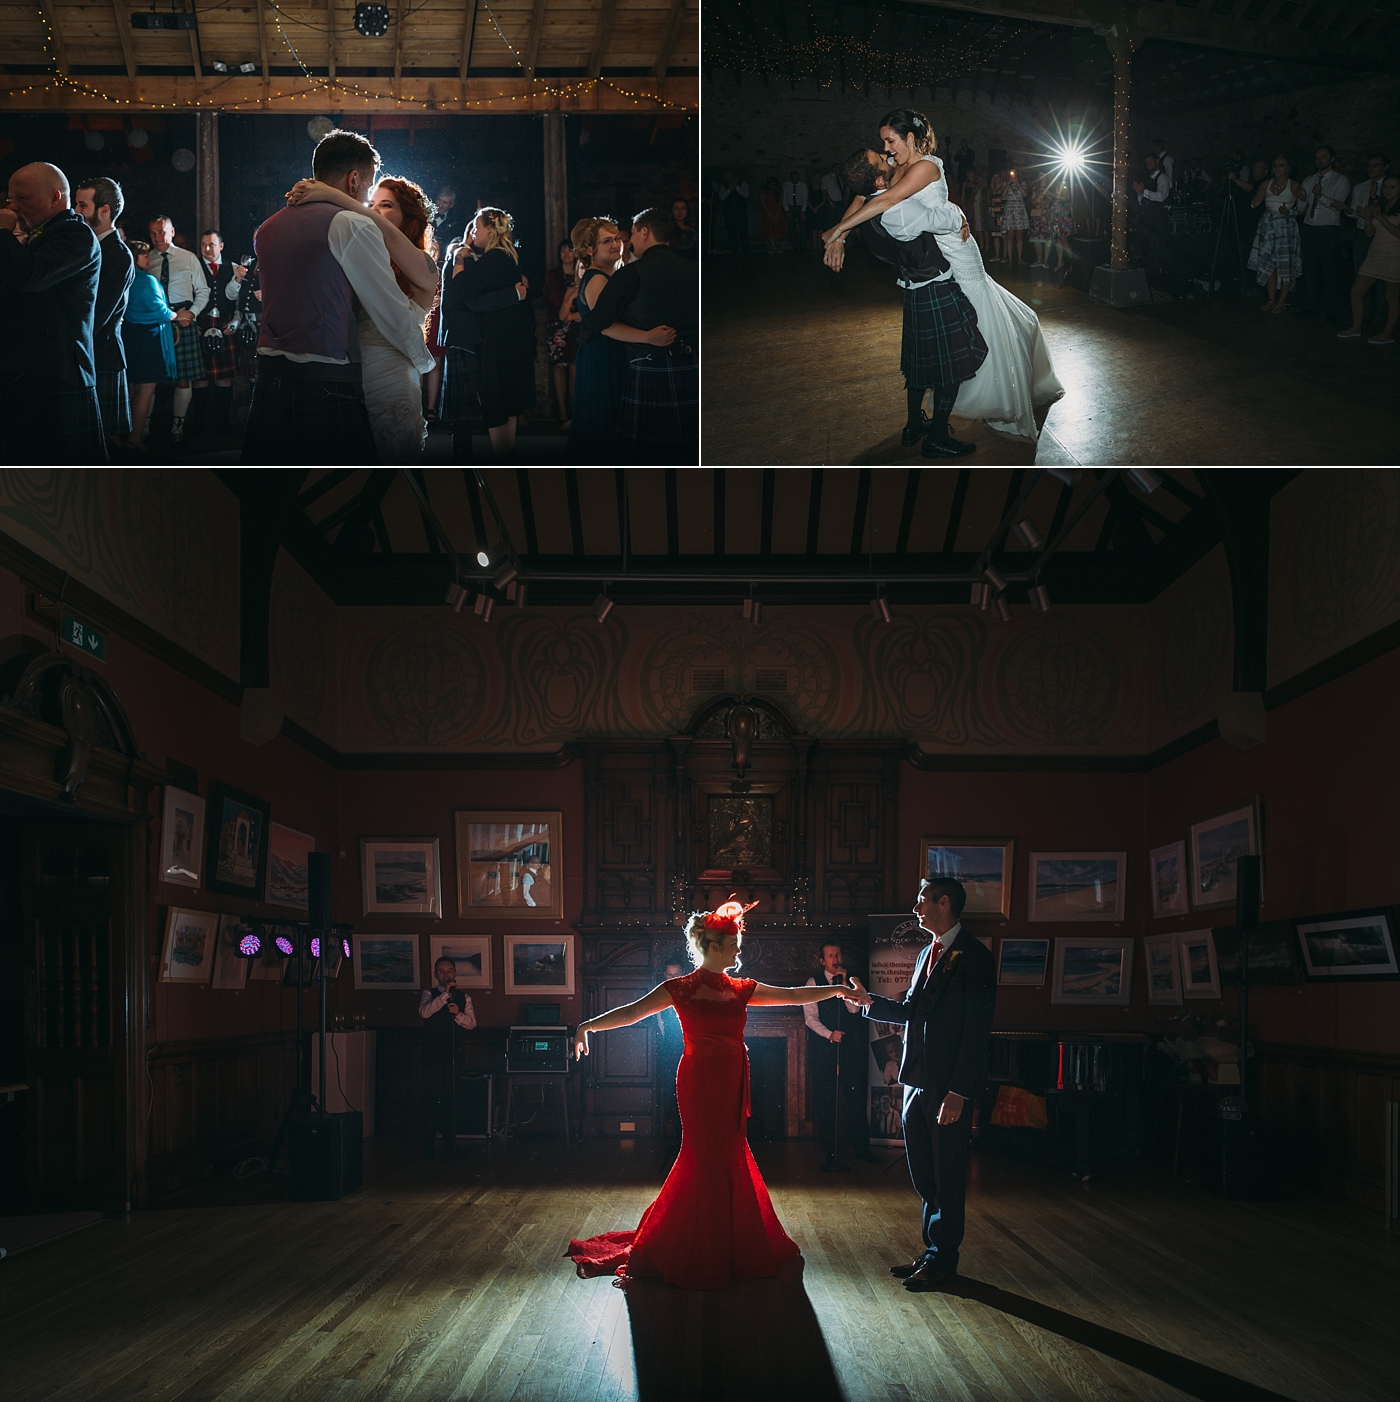 planning your wedding party timeline - images of various first dances - byre at inchyra, kinkell byre, glasgow art club